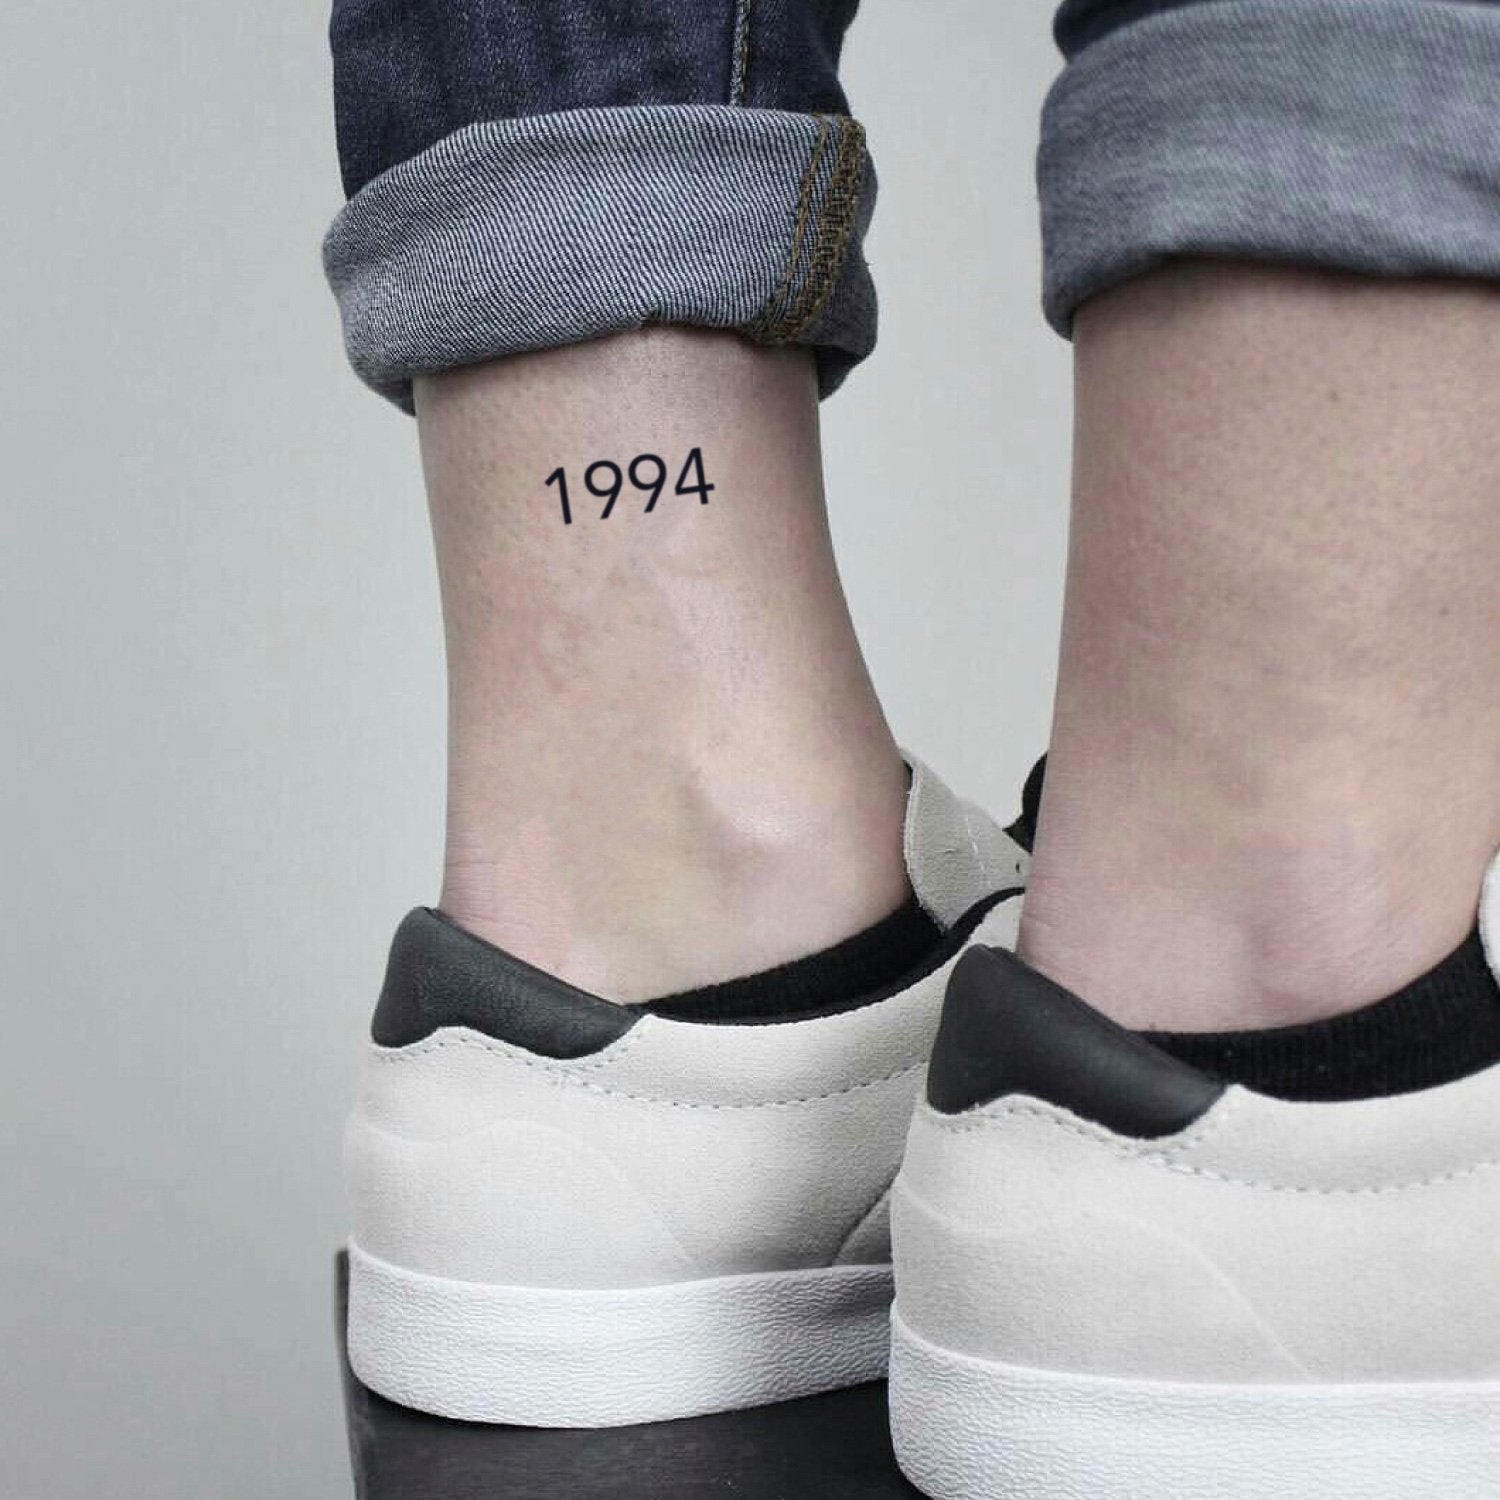 fake small 1994 lettering temporary tattoo sticker design idea on ankle